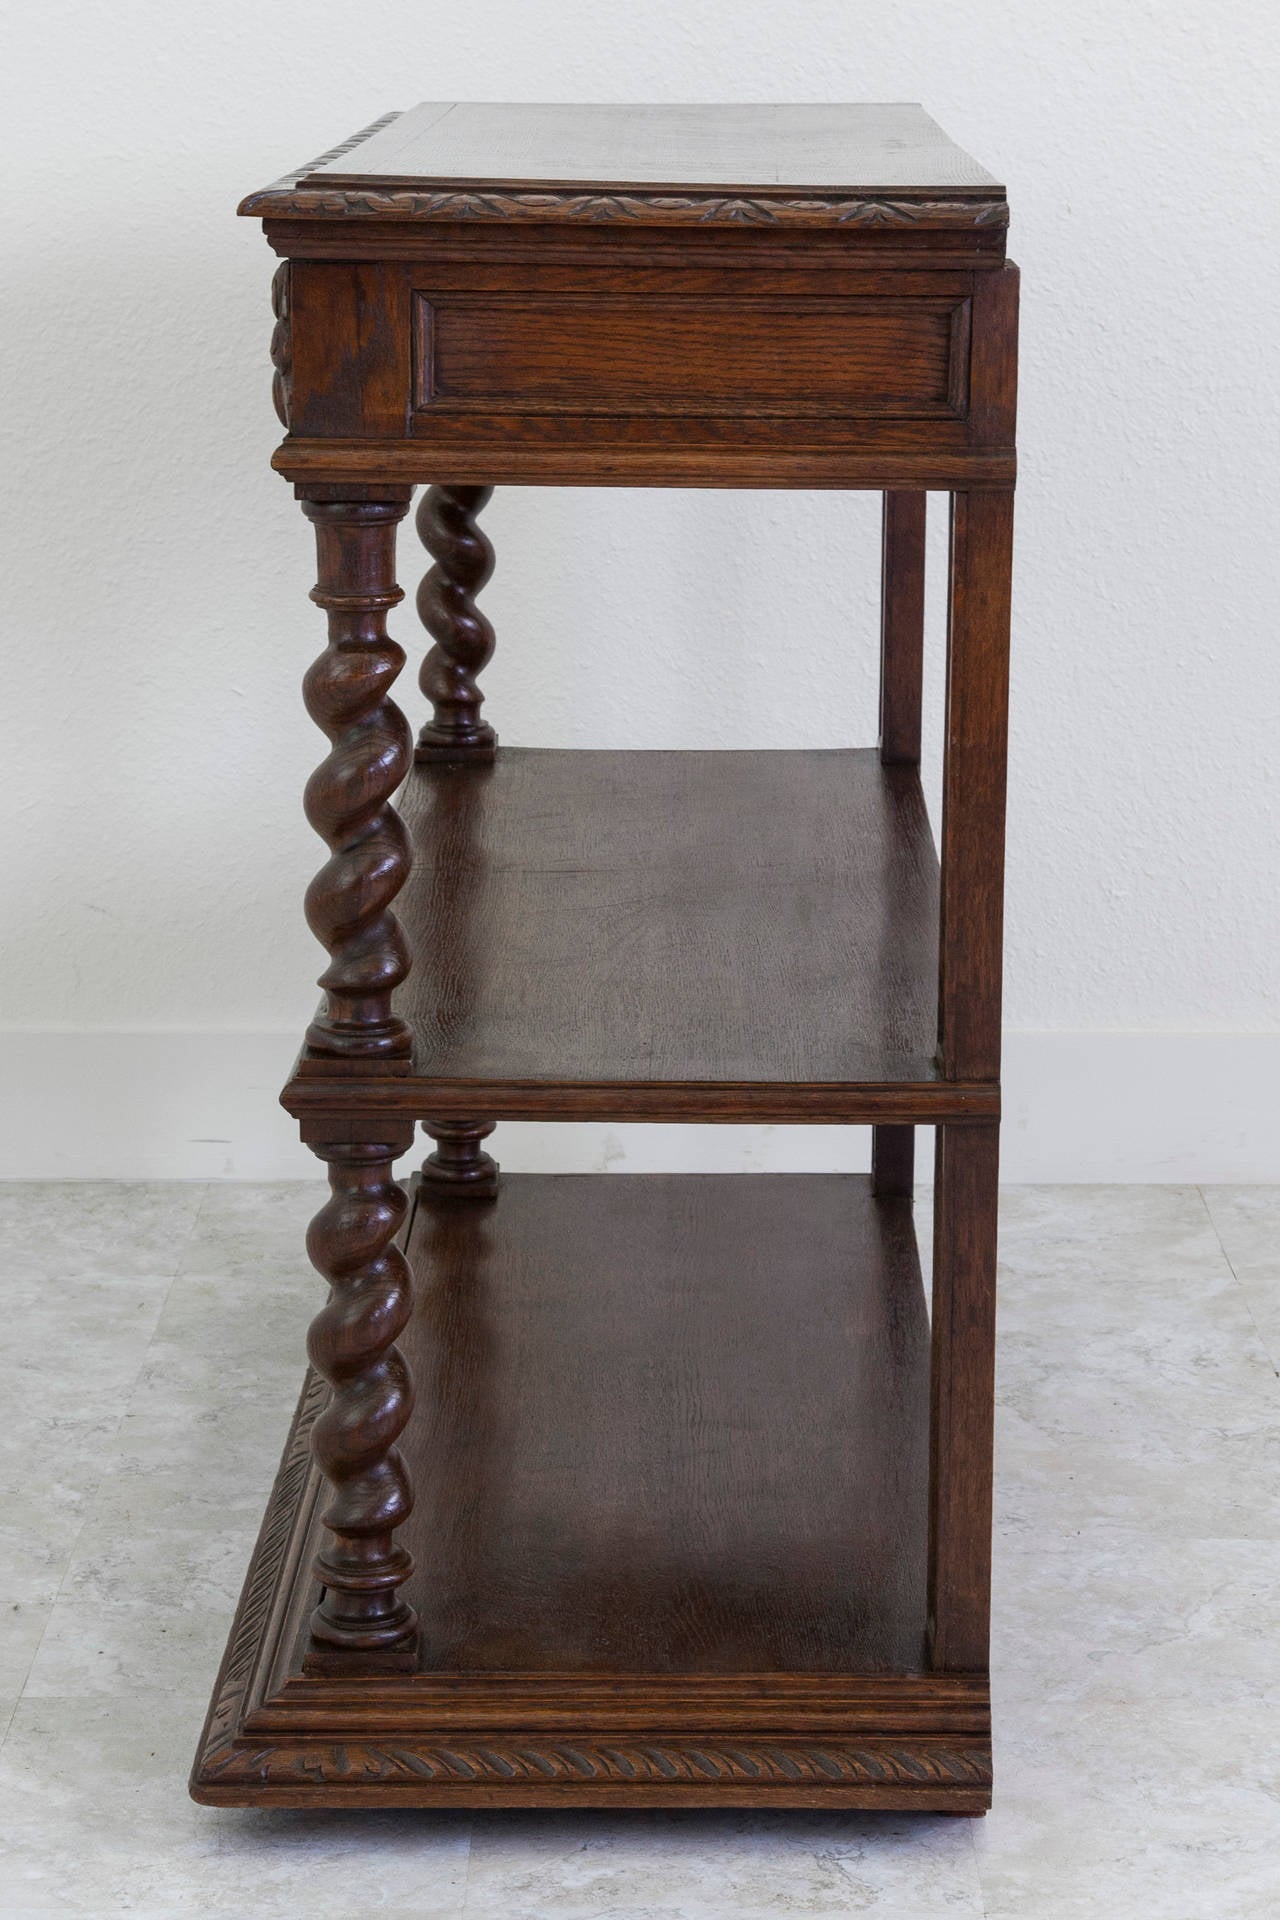 This hand-carved oak Louis XIII style dessert buffet features barley twist legs and two drawers with oak leaf and acorn carvings, circa 1880. Its gadrooned beveled edge top lifts up to reveal a Carrara marble surface originally used for preparing